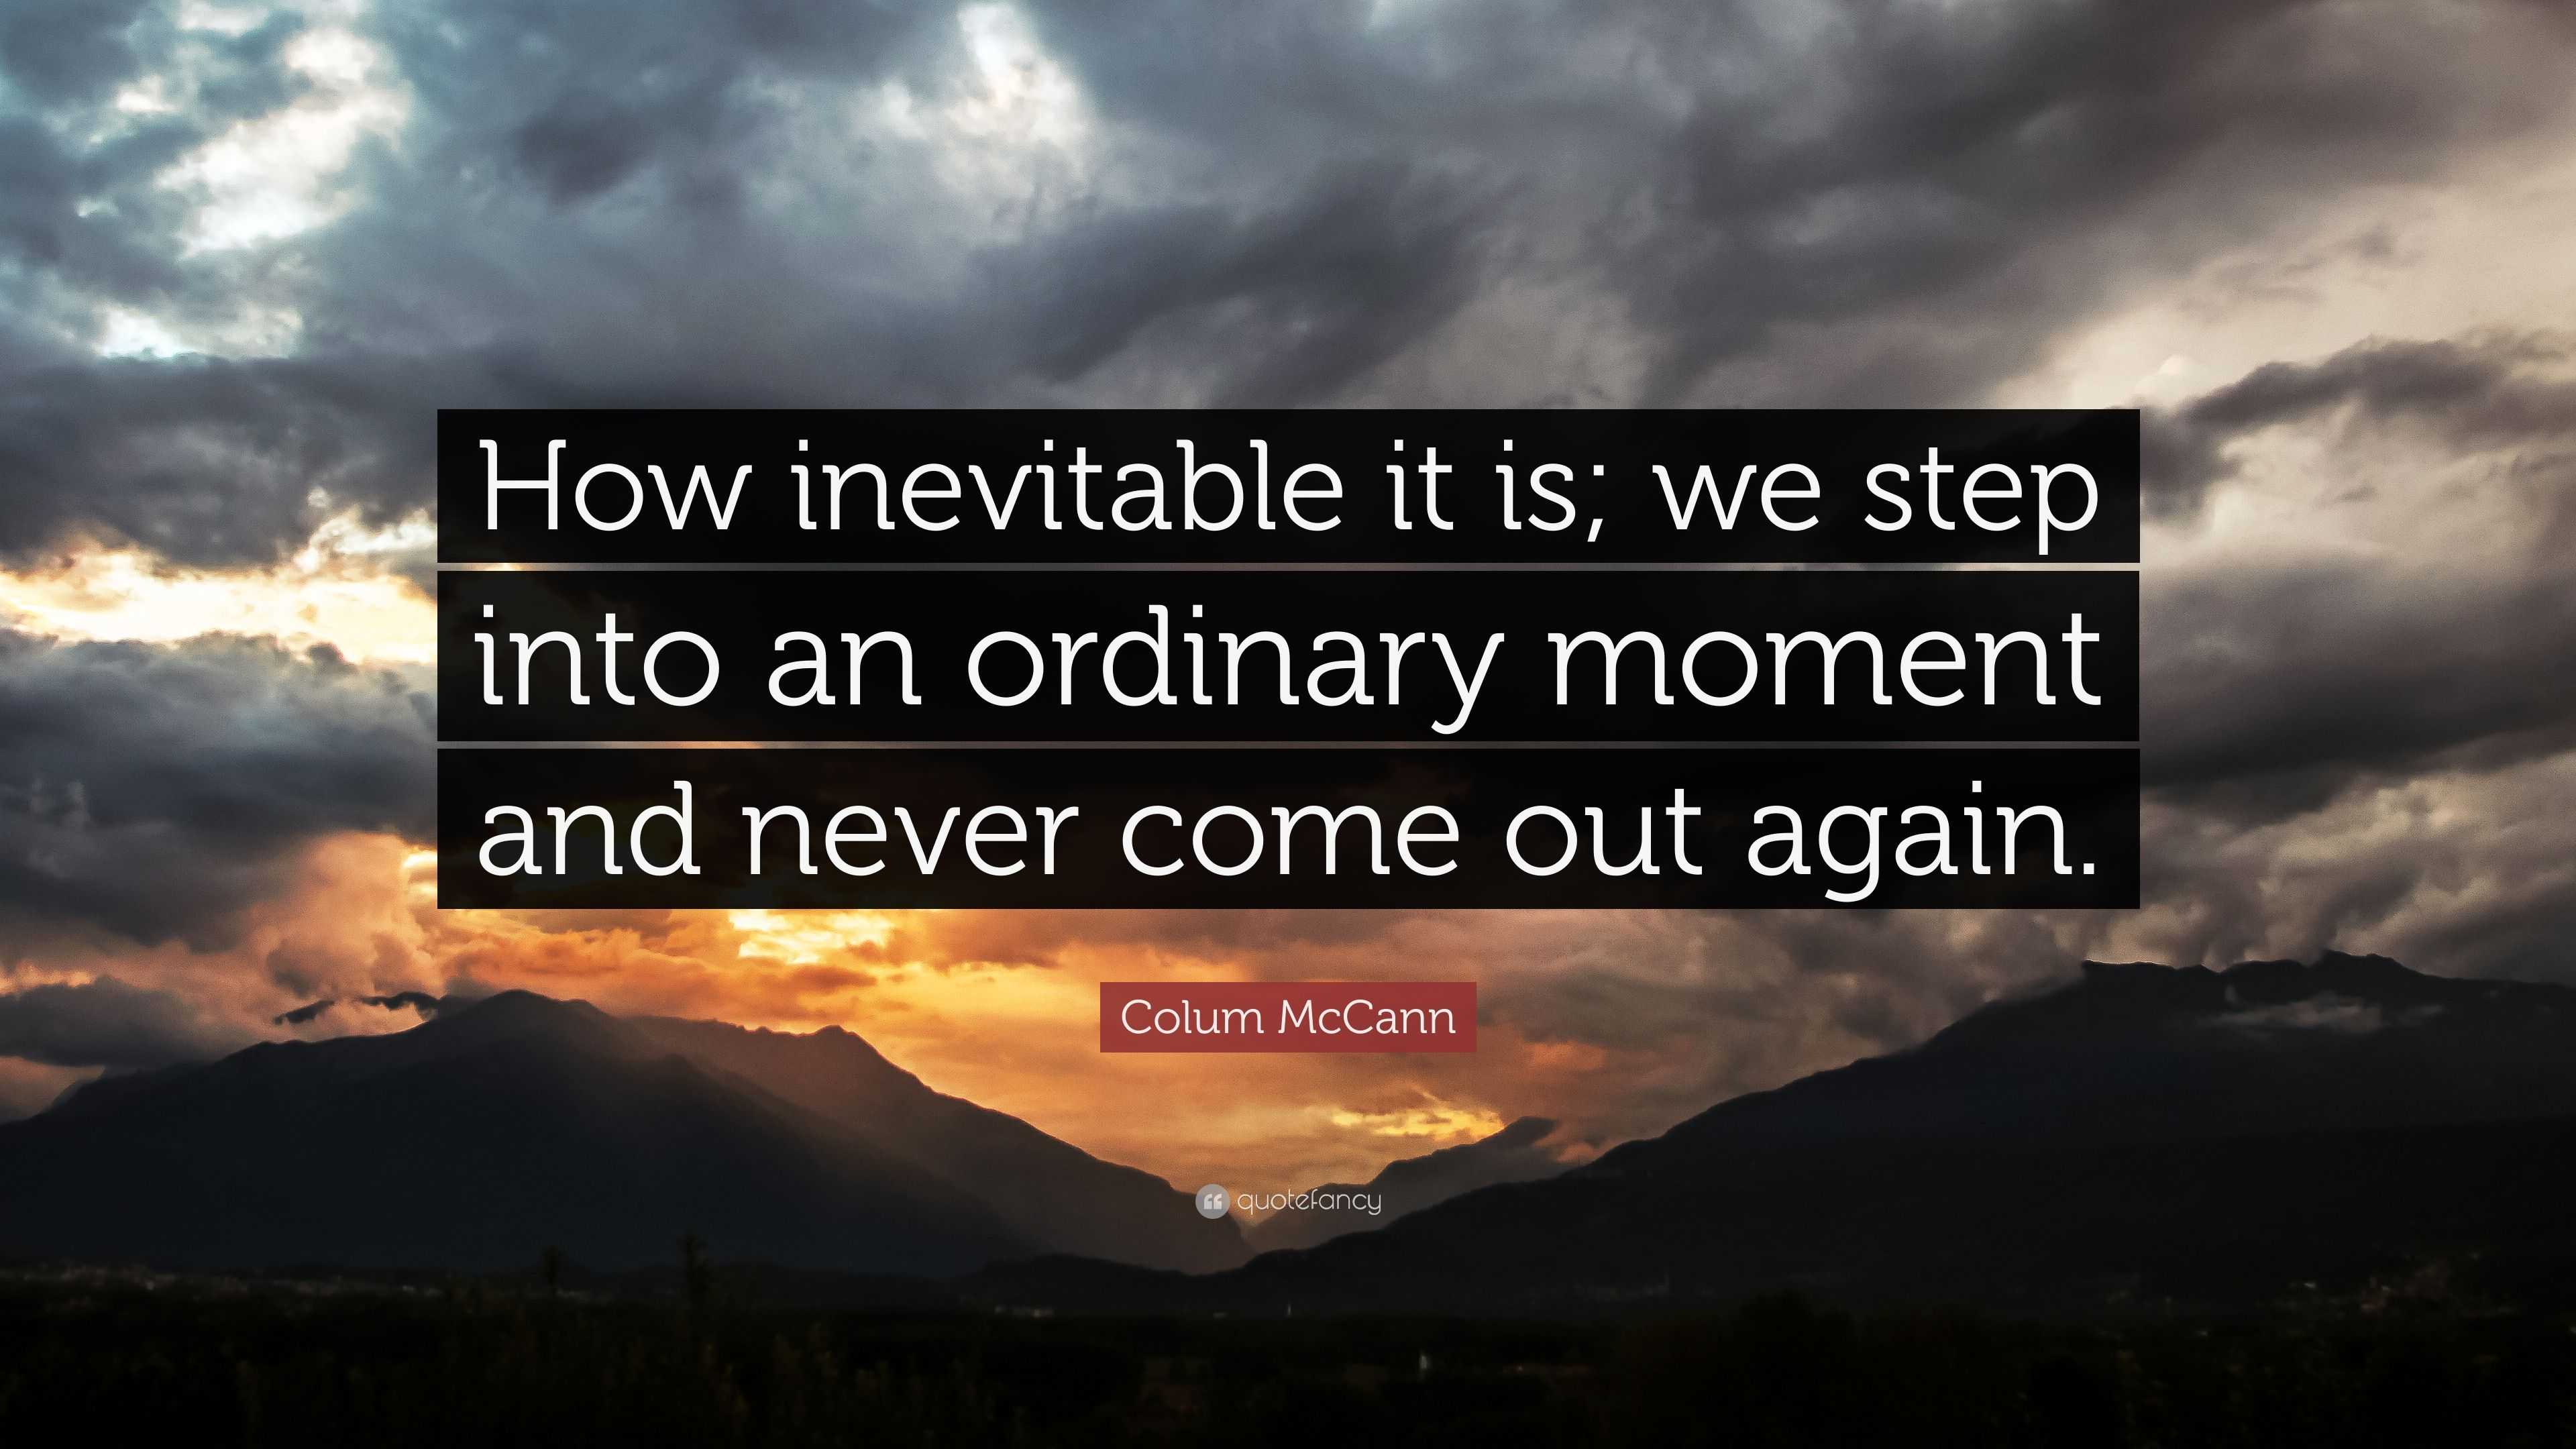 Colum McCann Quote: “How inevitable it is; we step into an ordinary ...